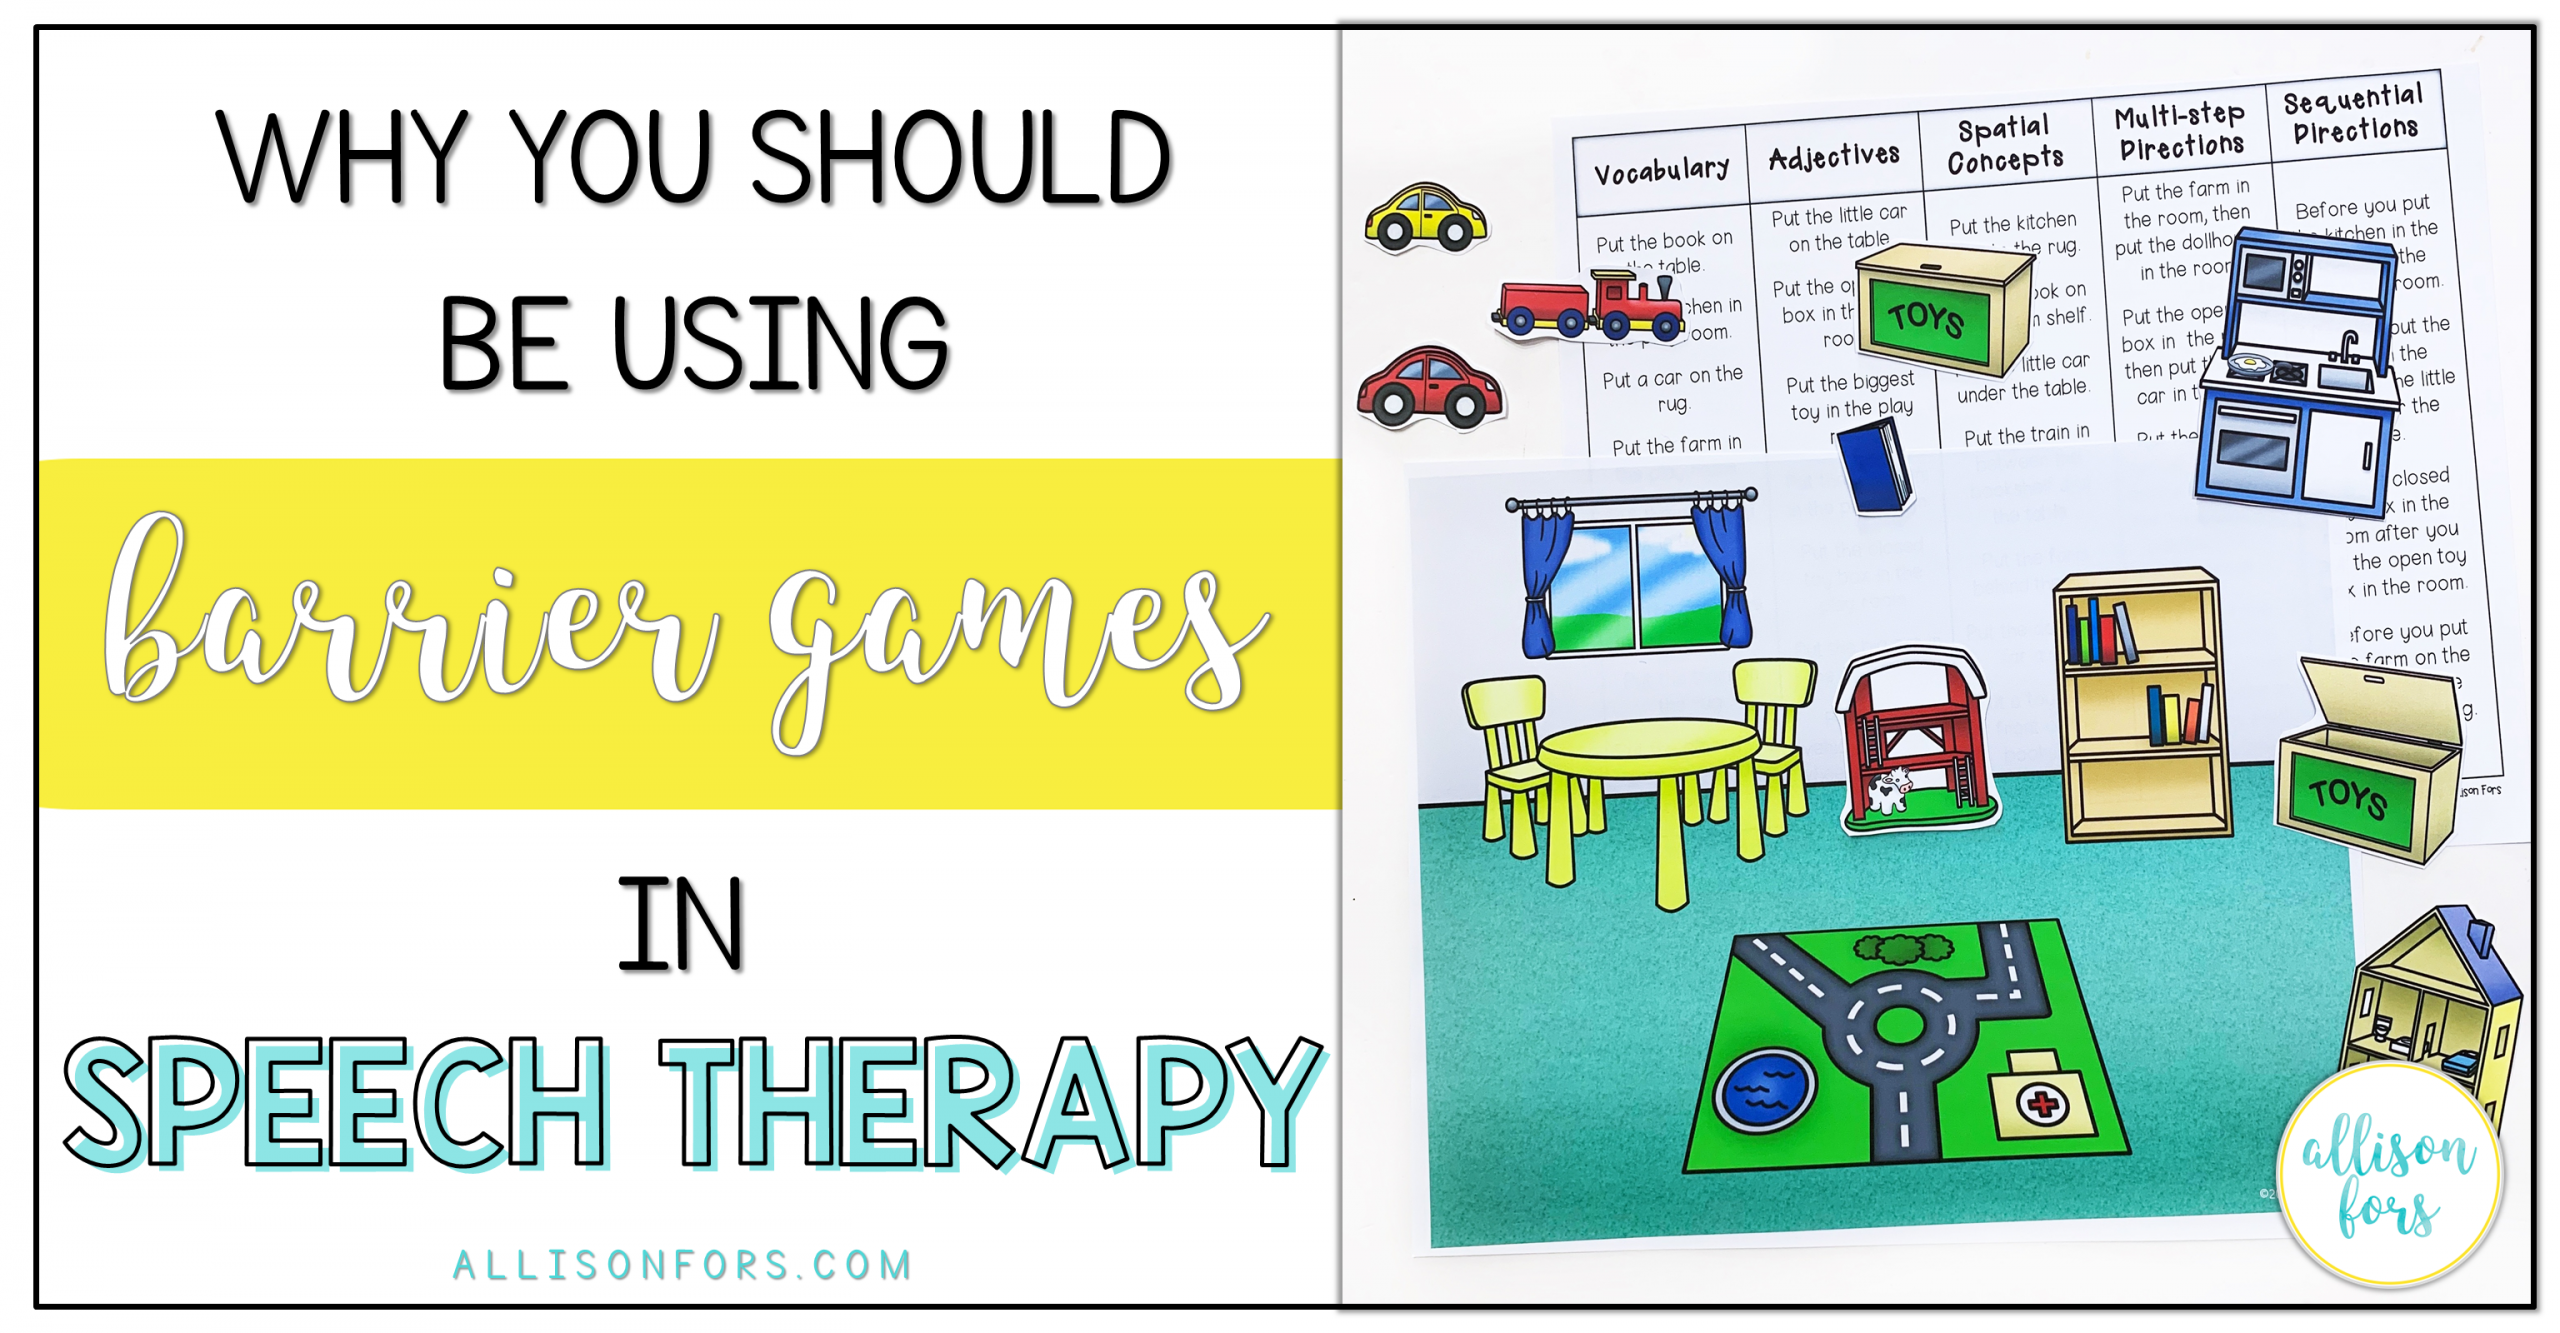 Why You Should Be Using Barrier Games in Speech Therapy